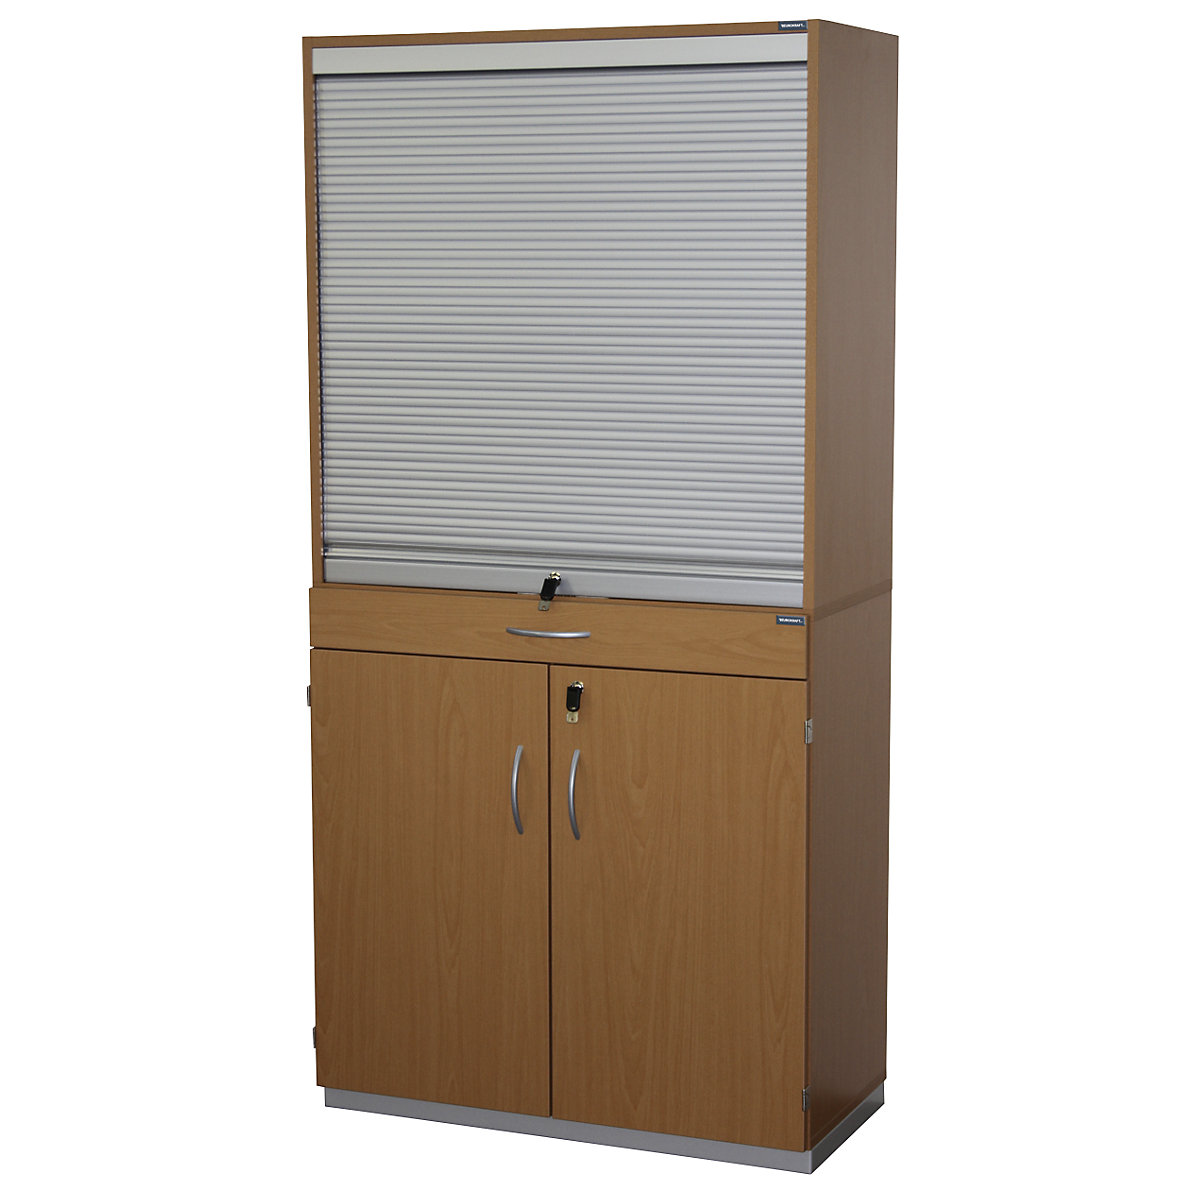 Sorting cupboard with roller shutter and add-on drawer unit - eurokraft pro